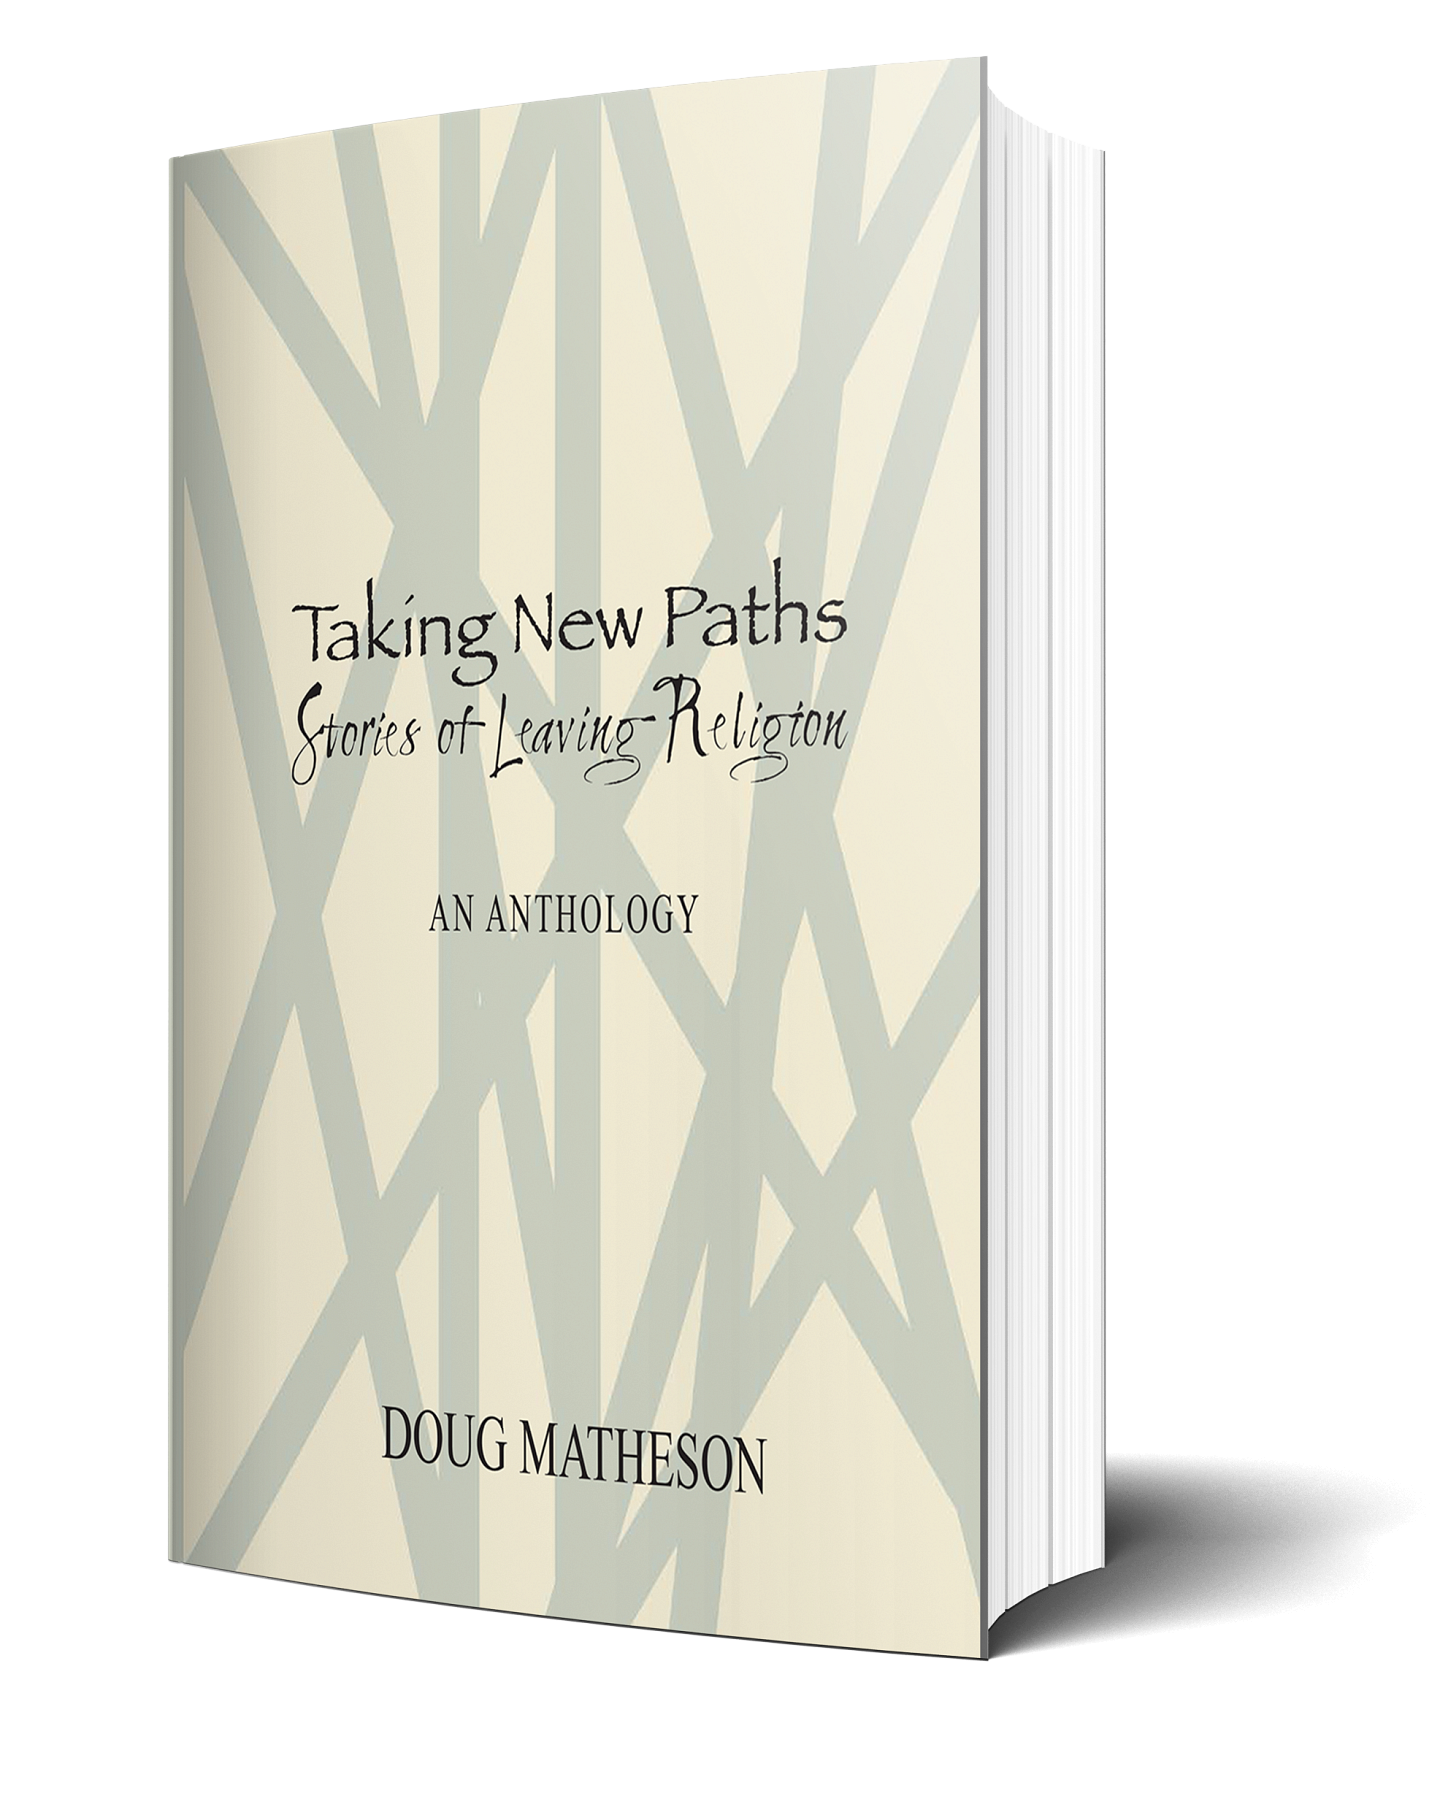 Taking New Paths: Stories of Leaving Religion